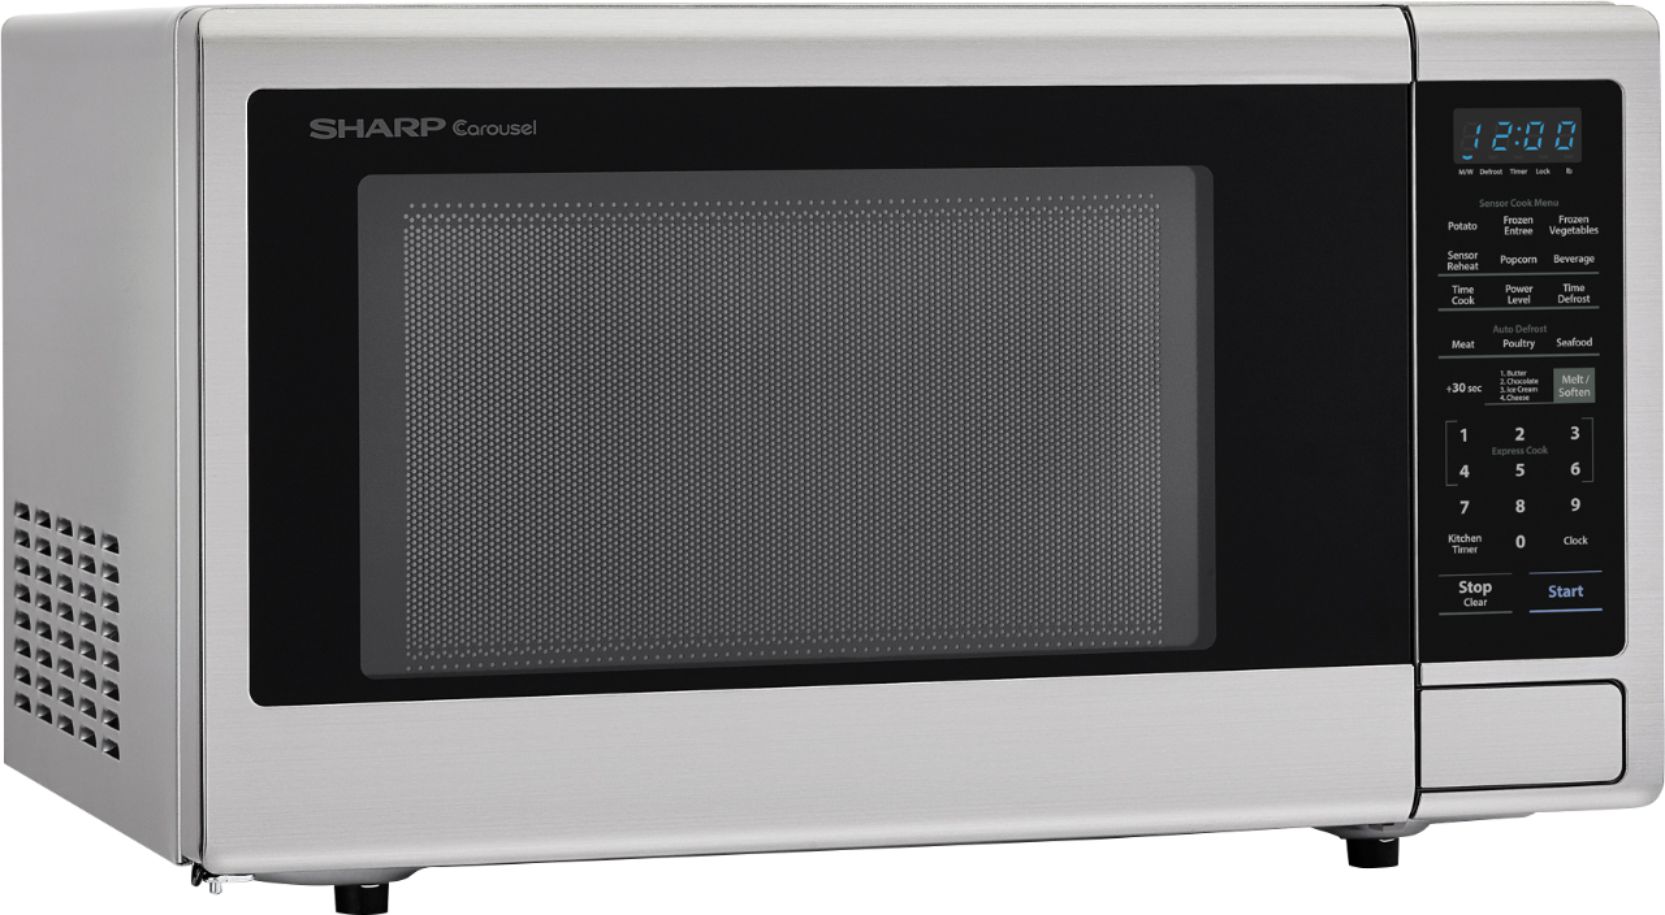 Sharp Carousel 2.2 Cu. Ft. Microwave with Sensor Cooking Stainless